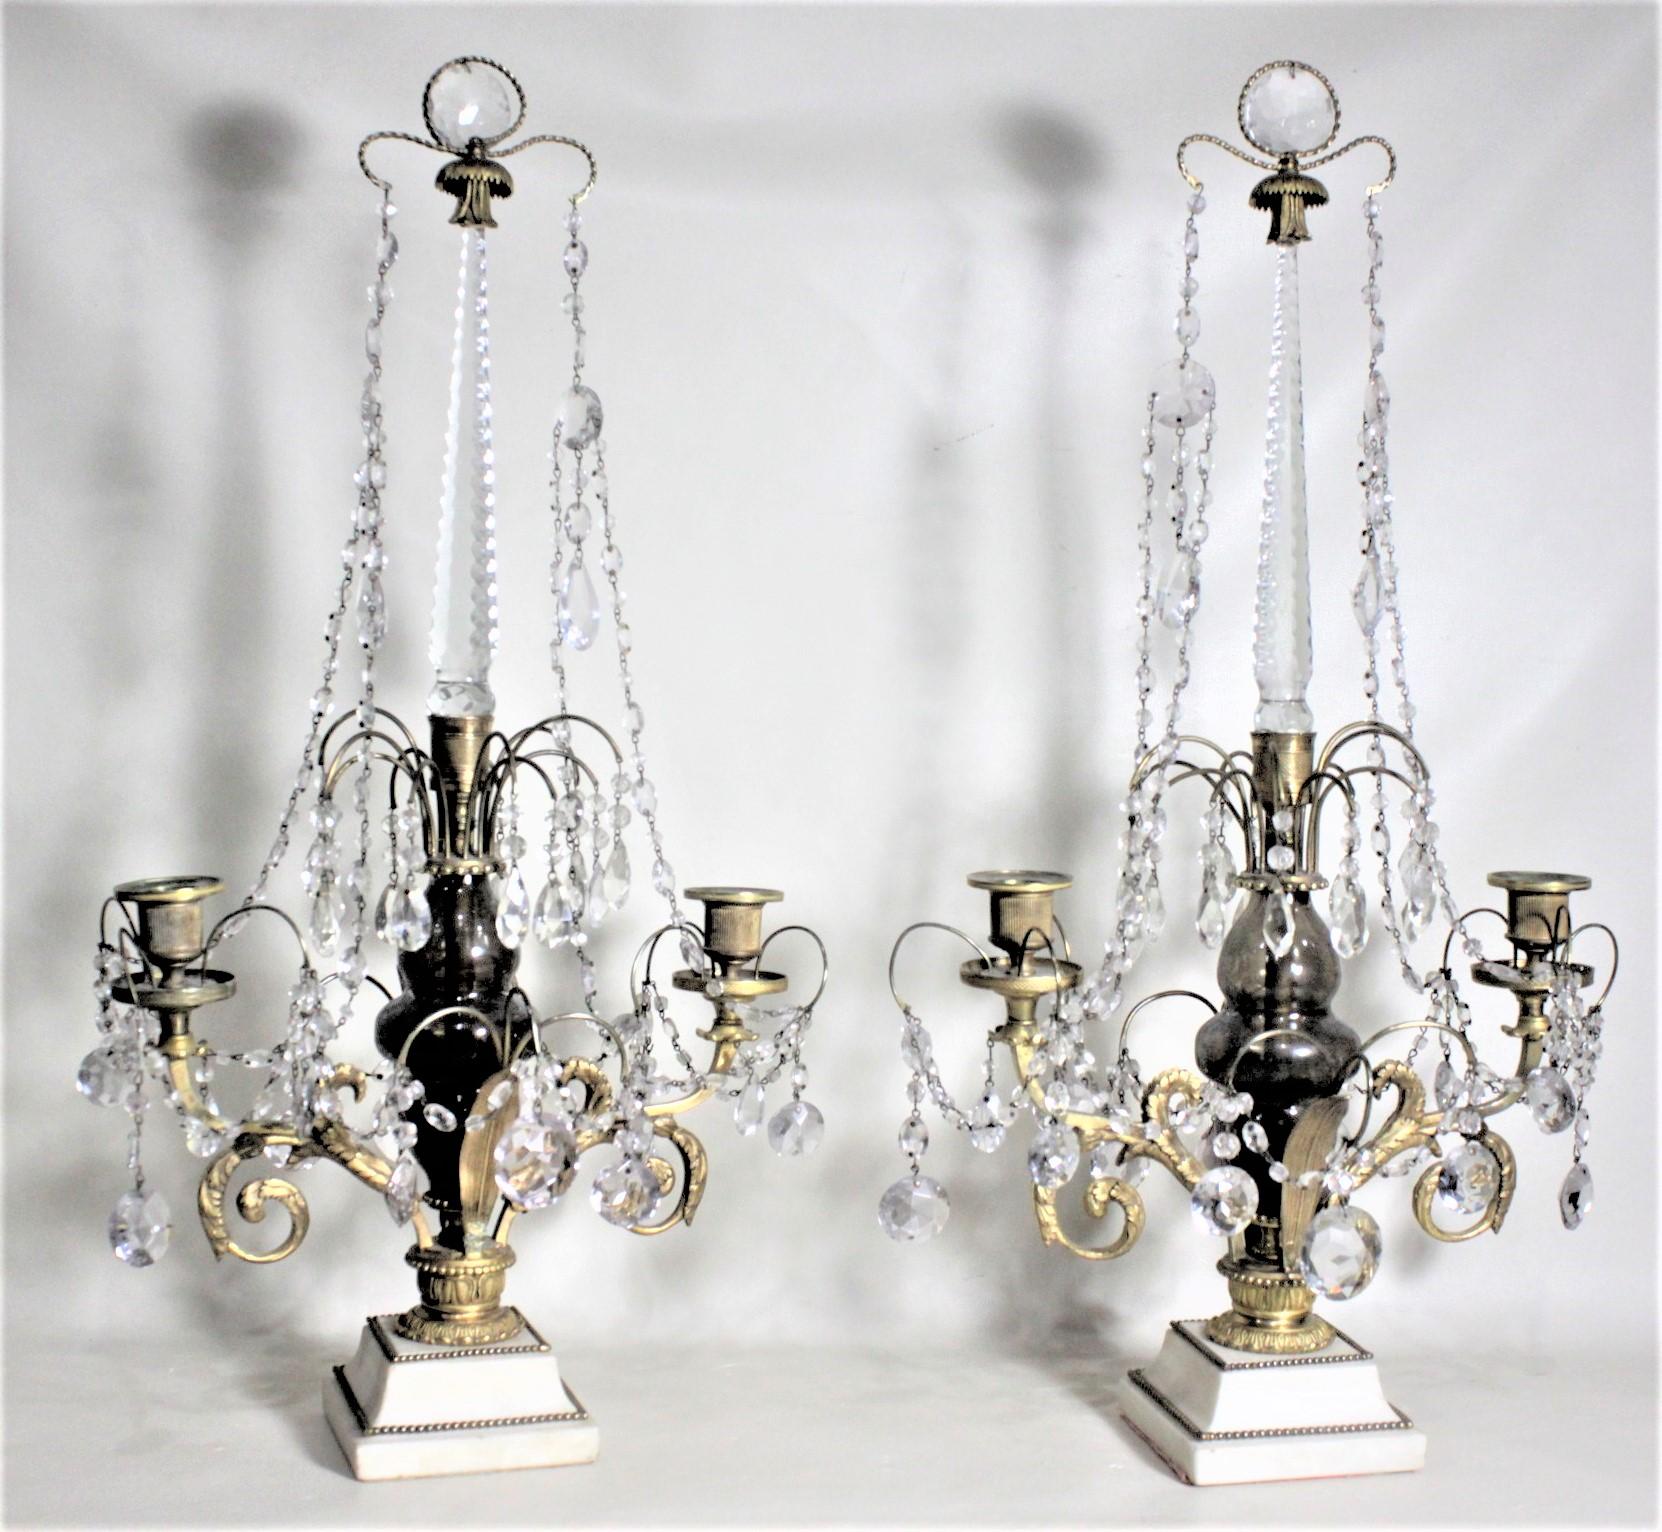 Renaissance Revival Pair of Antique Elaborate Gilt Bronze and Crystal Candelabras or Candleholders For Sale